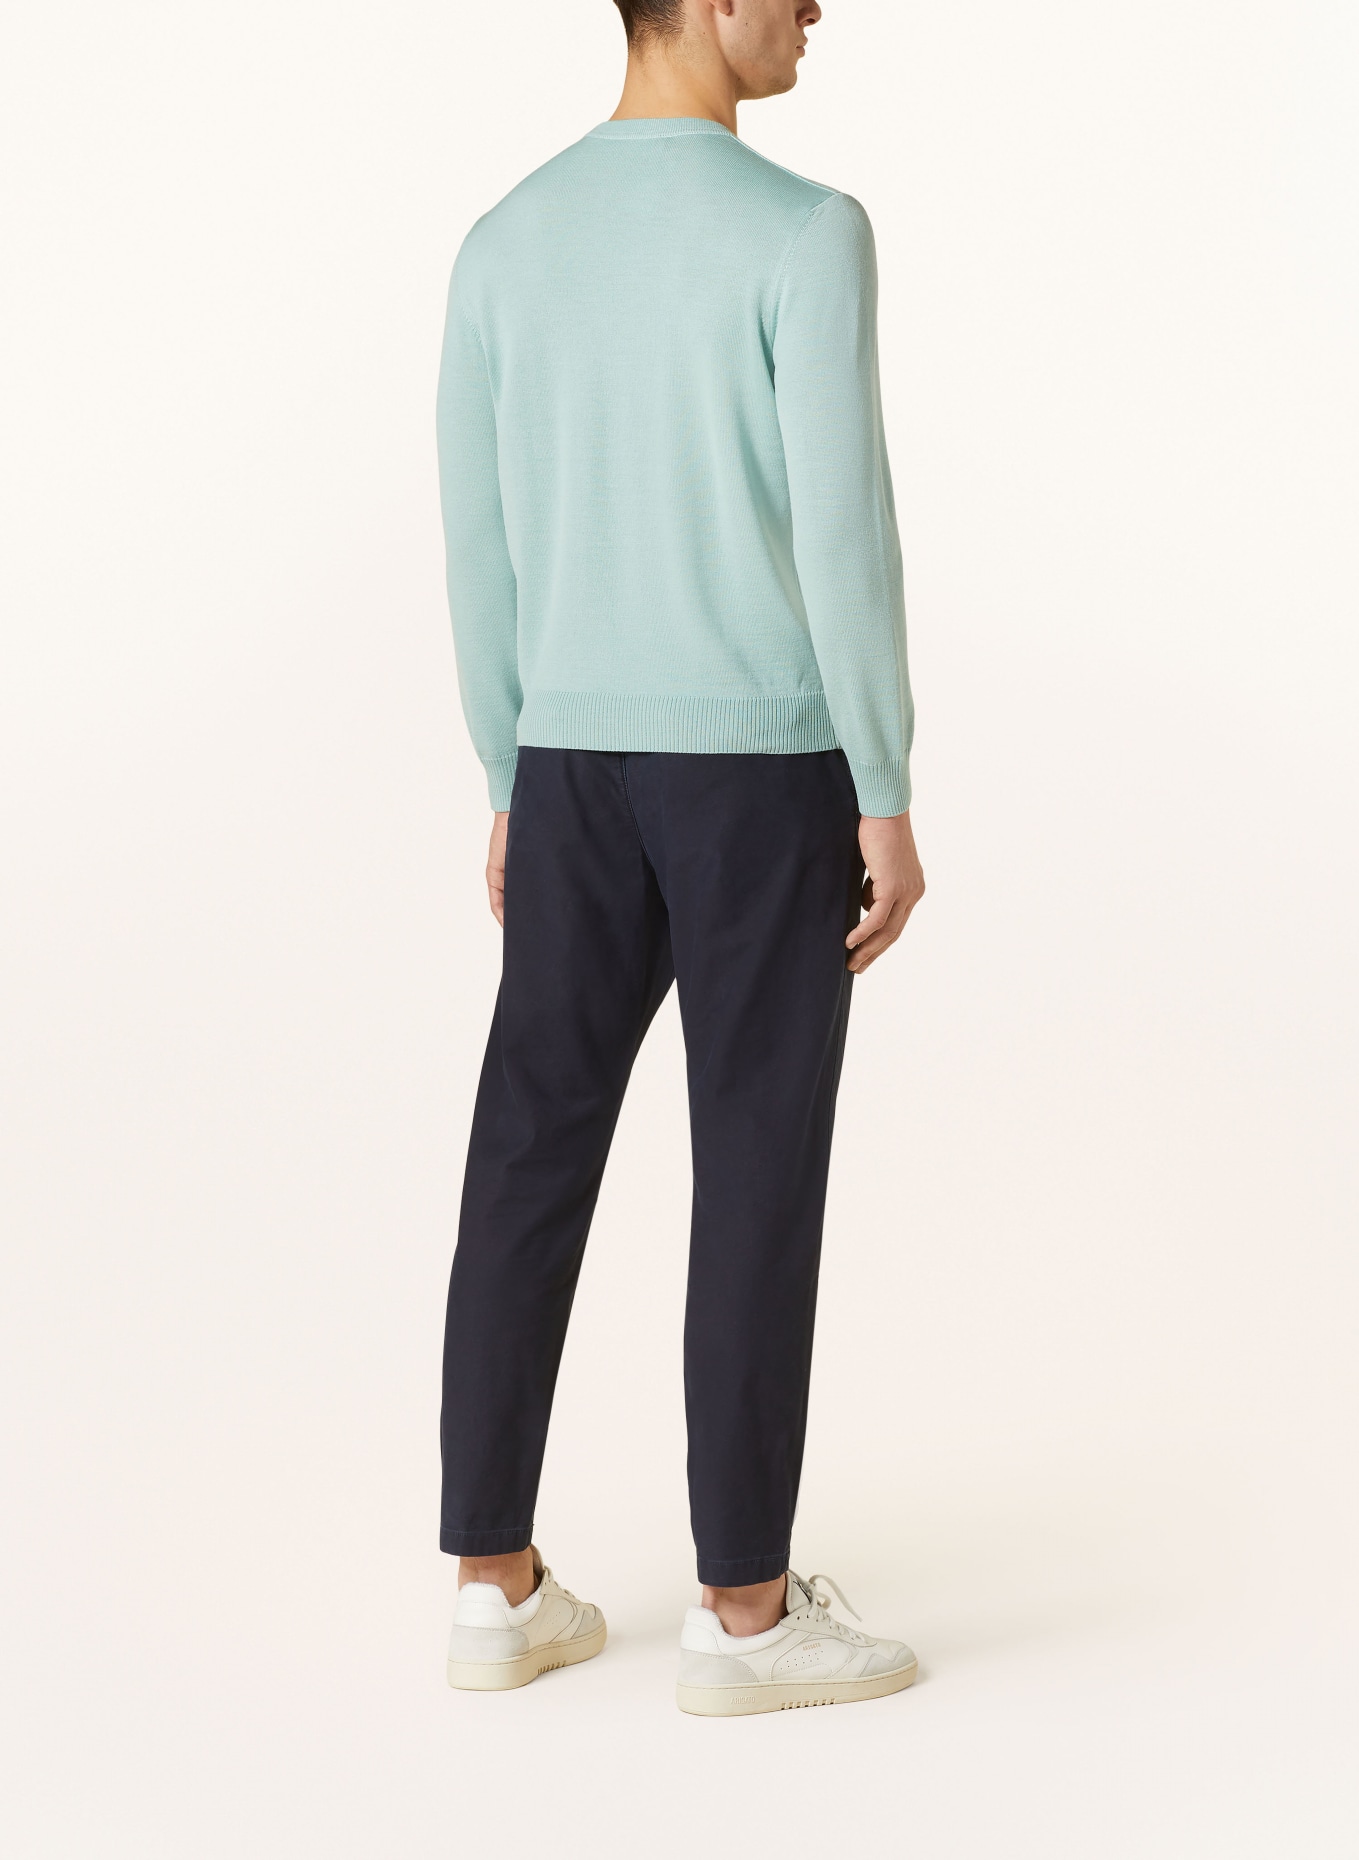 MAERZ MUENCHEN Sweater , Color: MINT (Image 3)